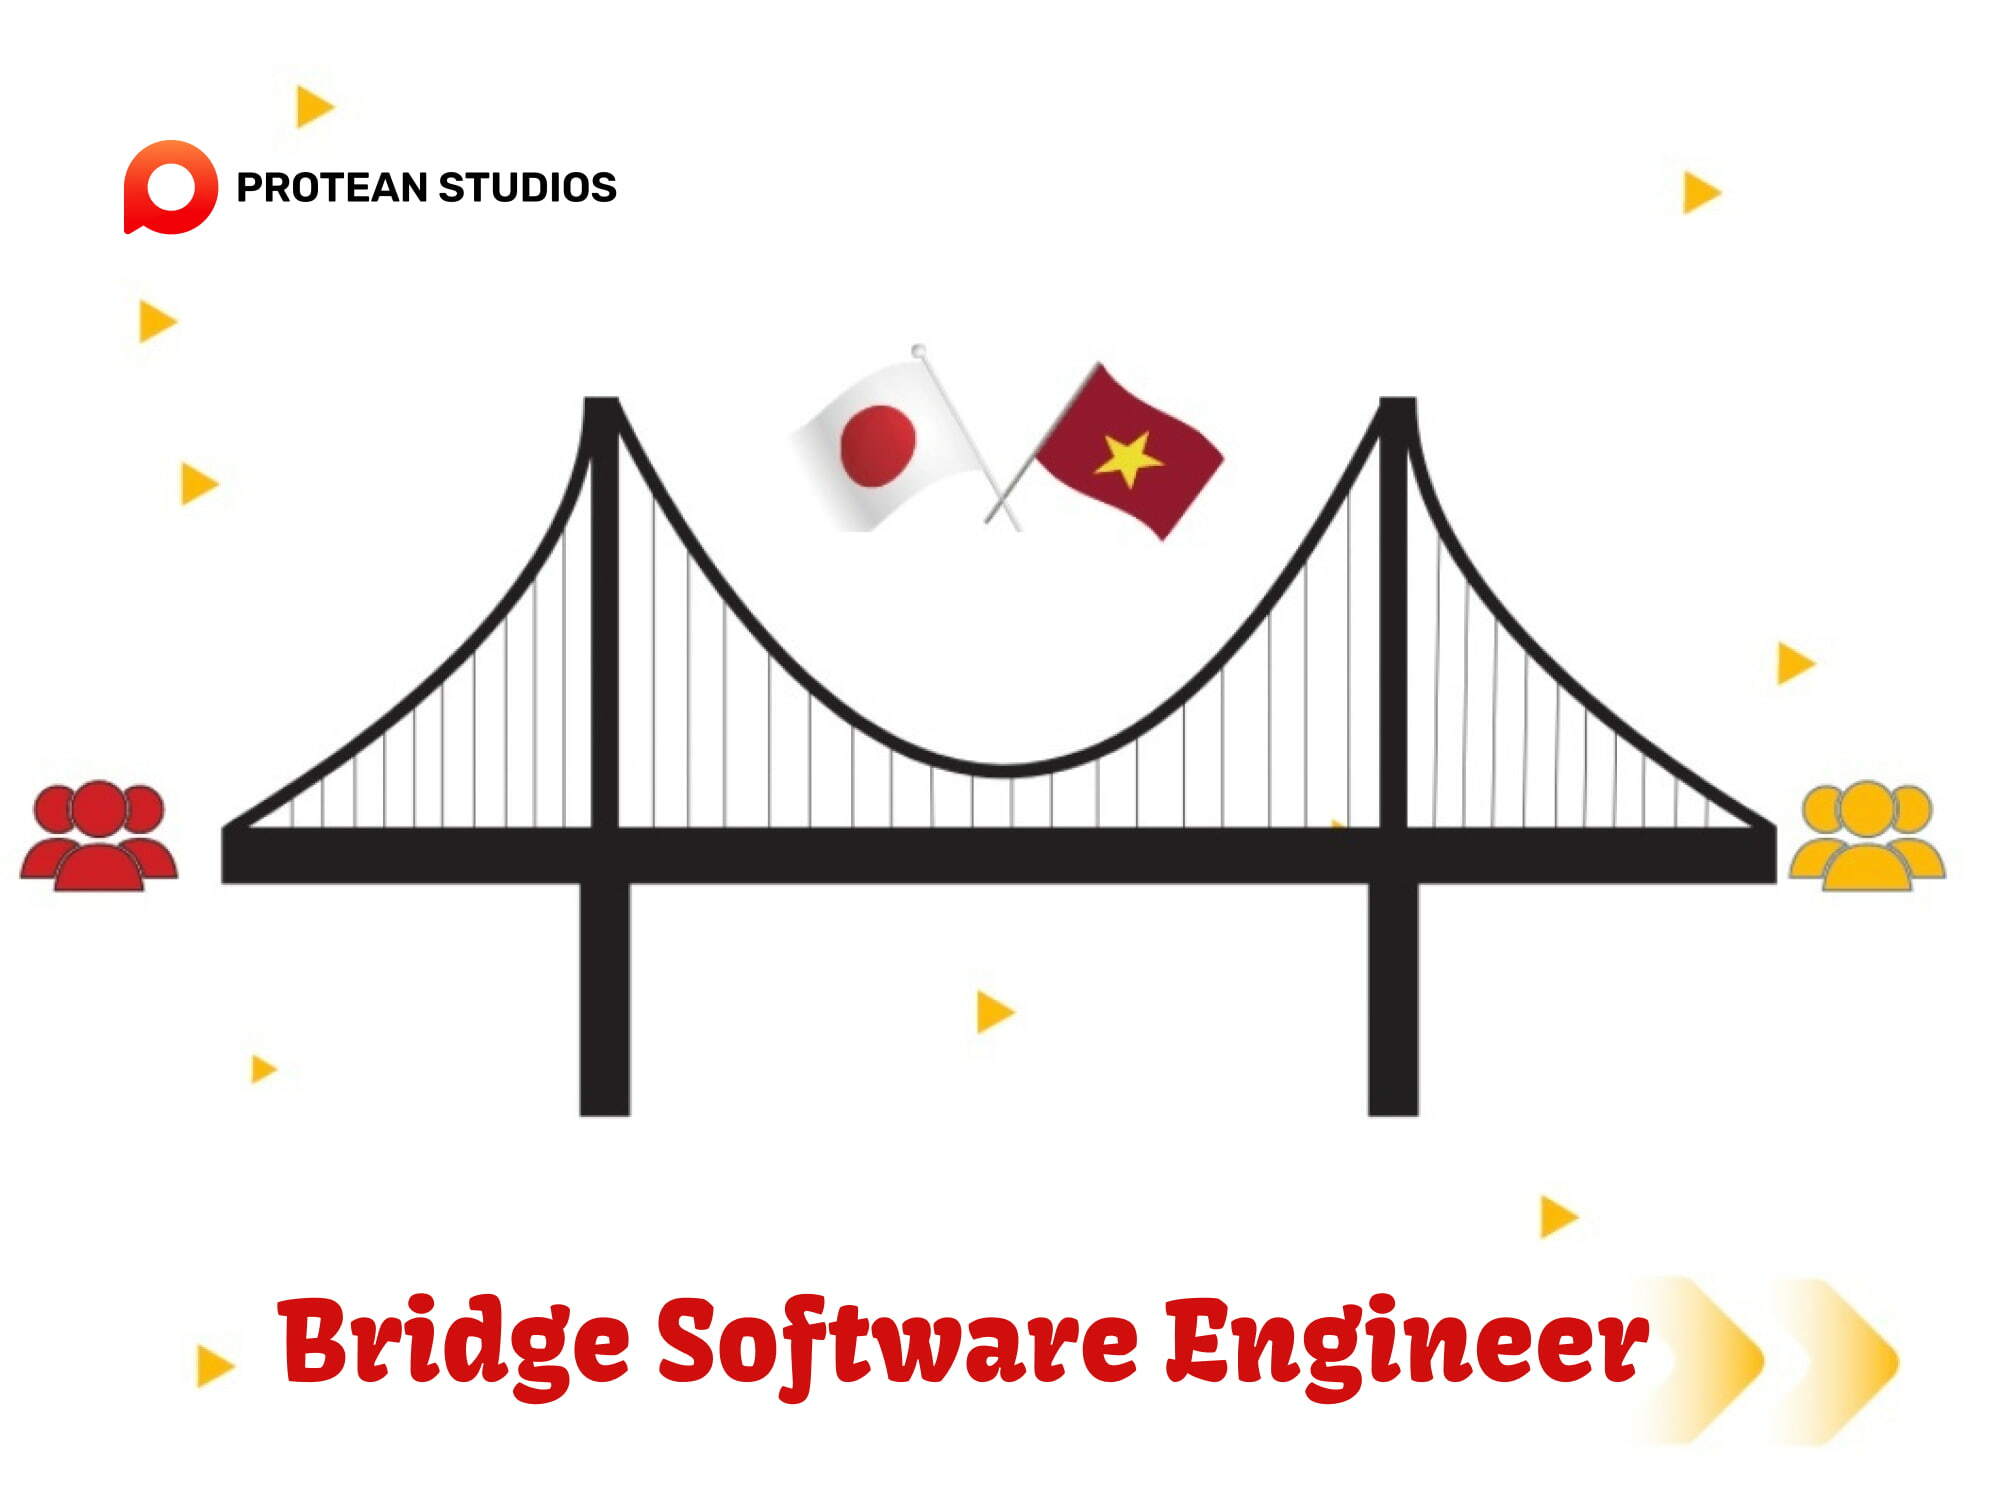 What is a Bridge Software Engineer?